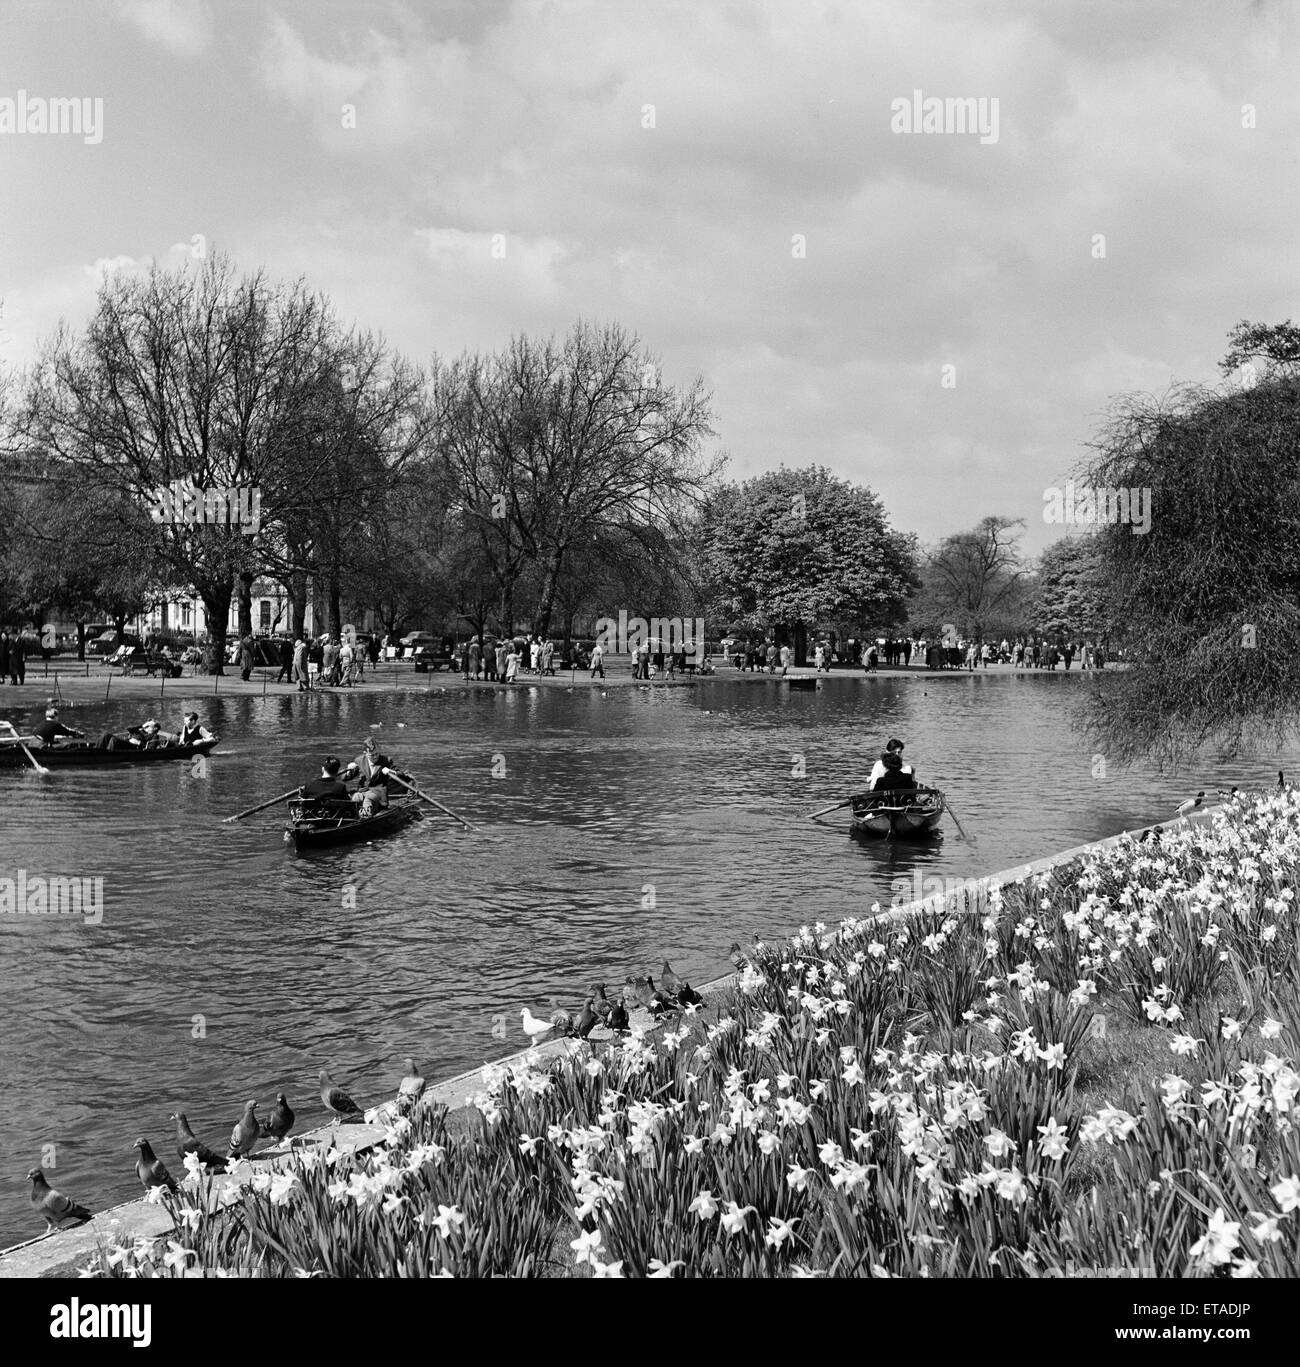 People enjoying a day out in Regents Park, London. 23rd April 1954. Stock Photo